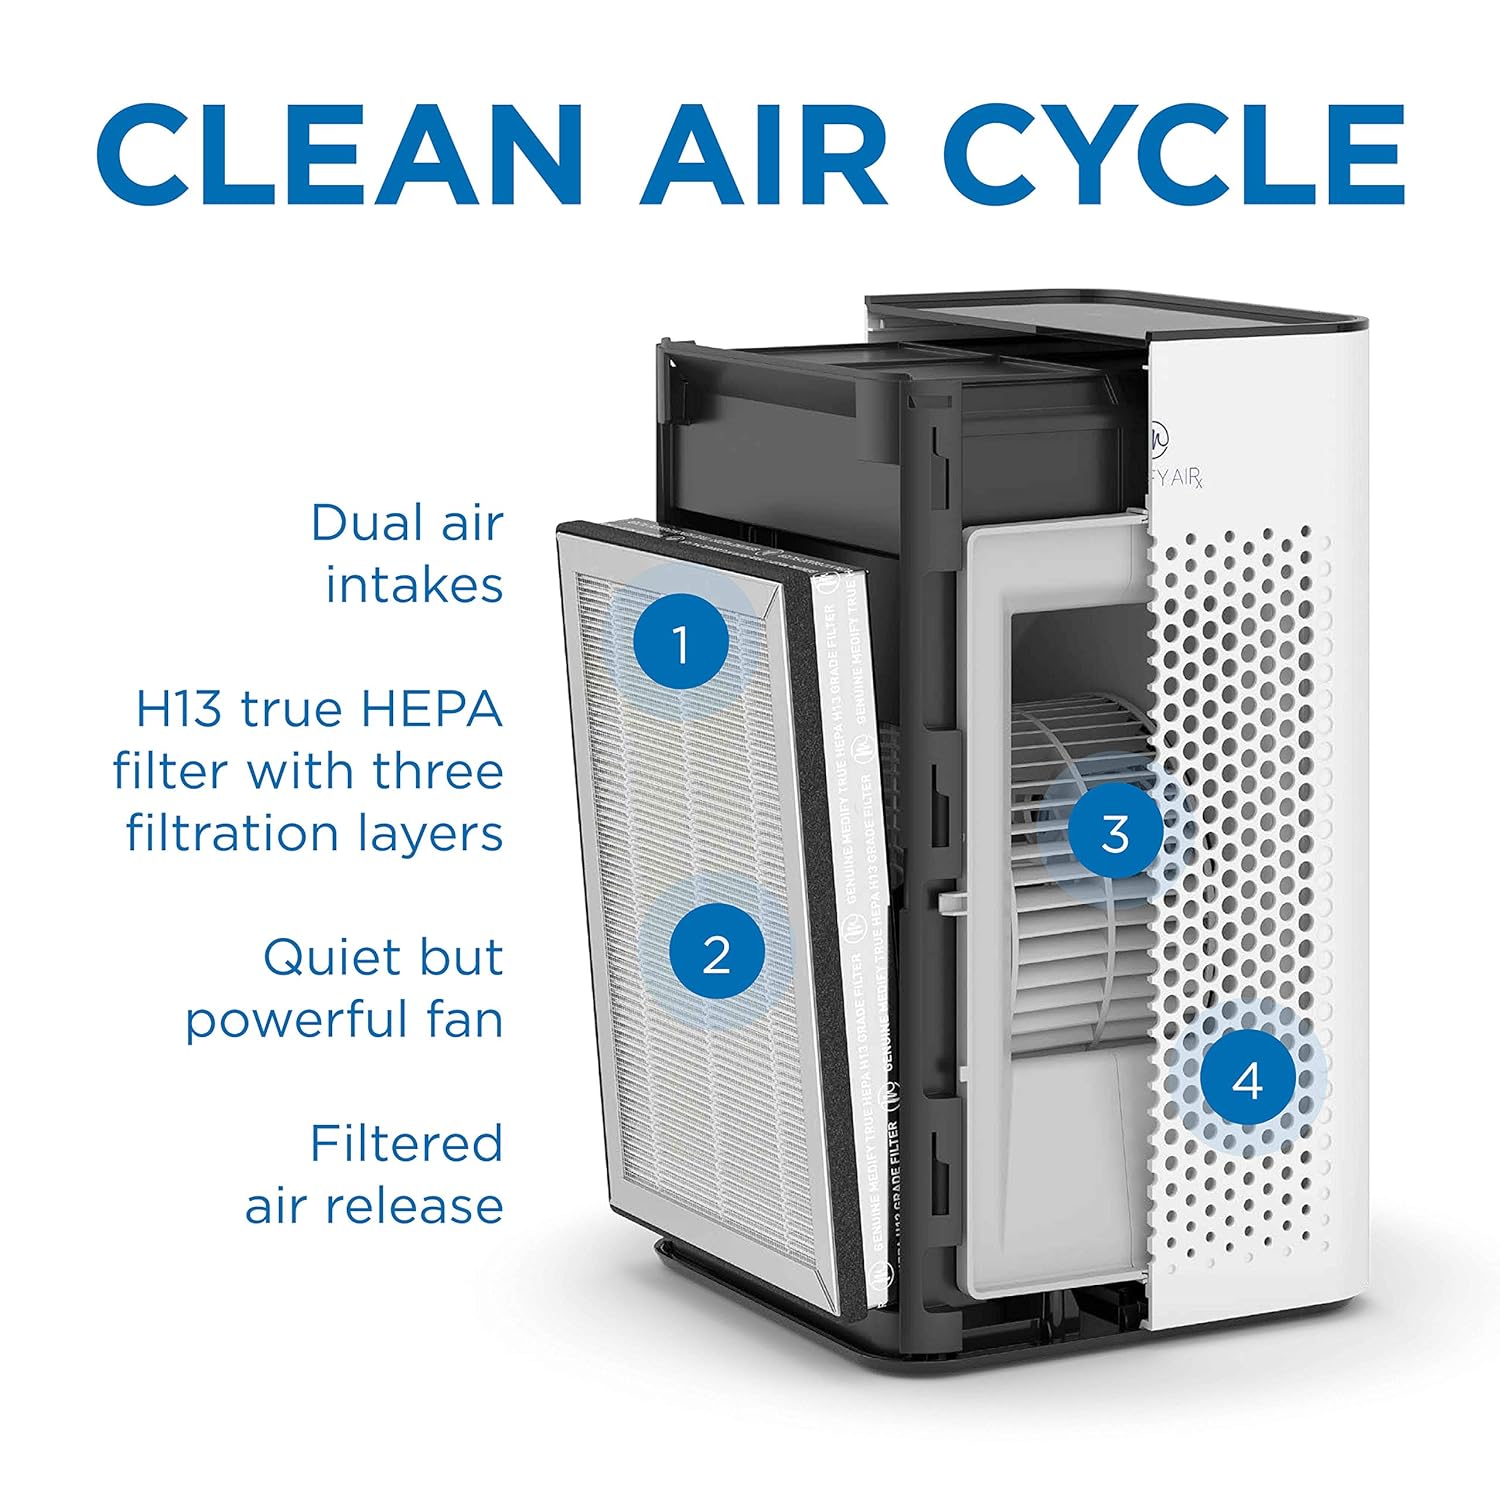 Medify MA-25 Air Purifier with H13 True HEPA Filter | 46 m² Coverage | Filters Allergens, Smoke, Dust, Odors, Pollen, Pet Hair | Quiet | Removes 99.9% Particles up to 0.1 Microns | White, Pack of 1